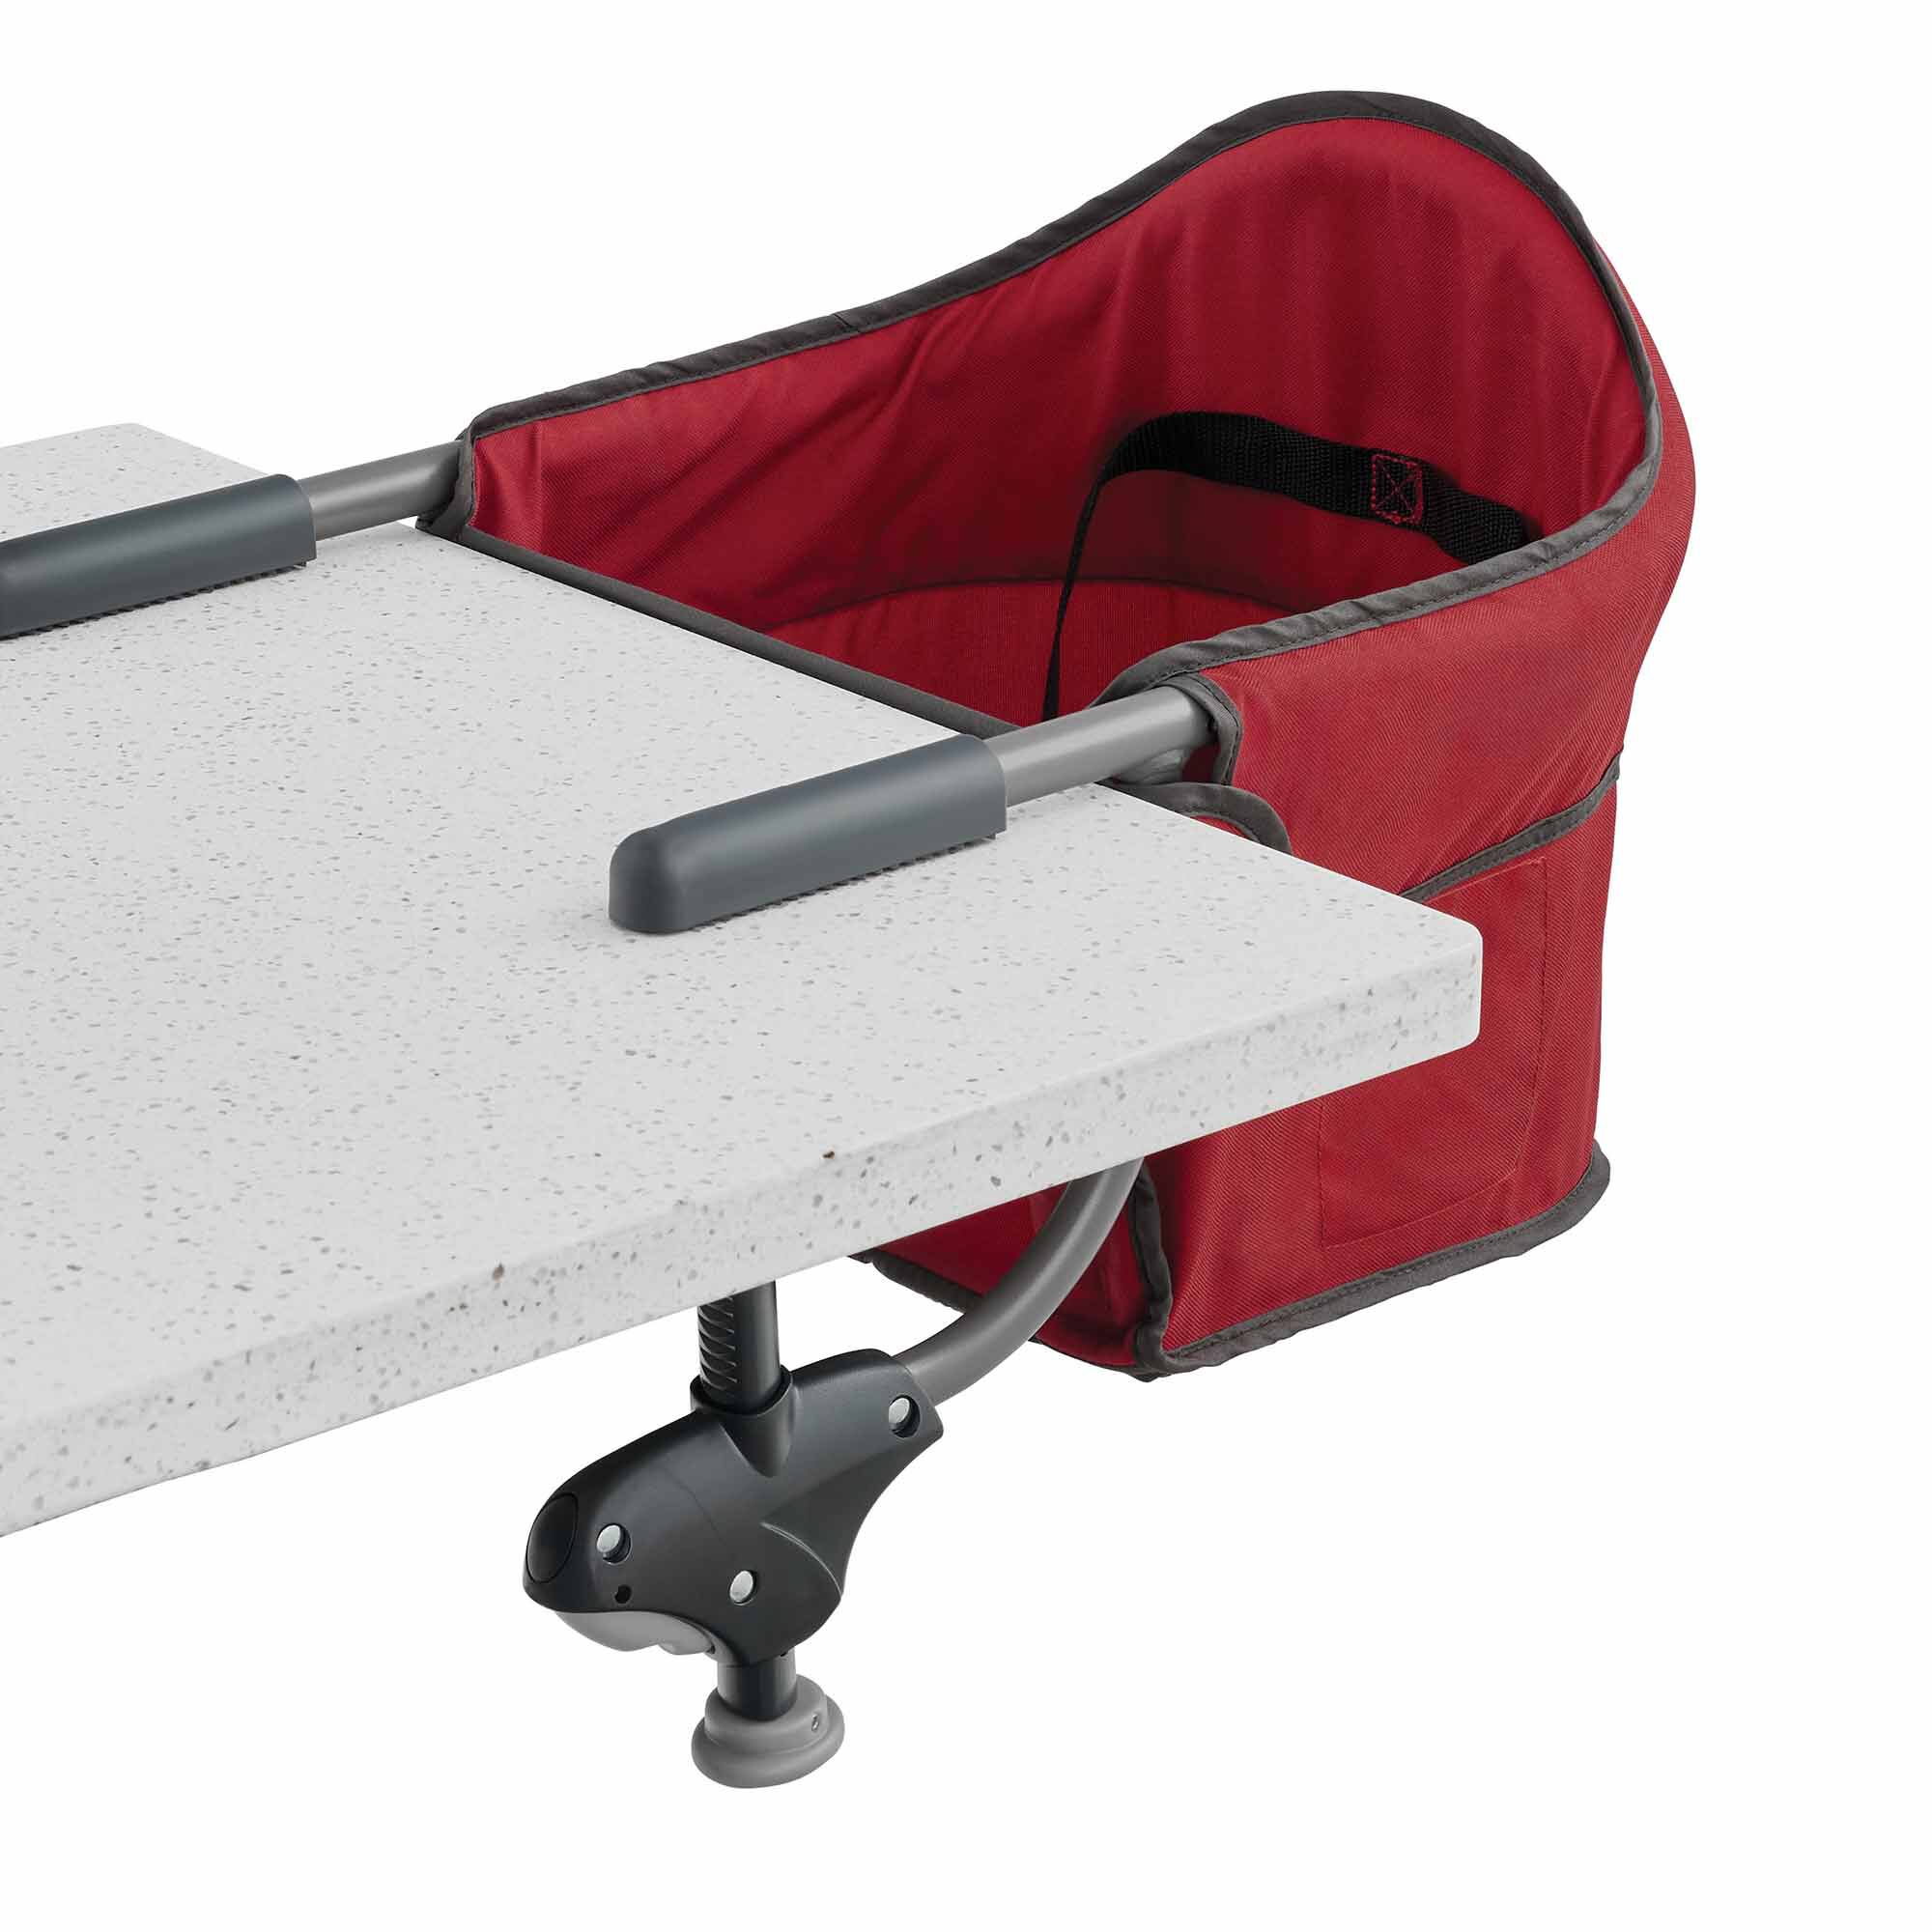 https://www.chiccousa.com/dw/image/v2/AAMT_PRD/on/demandware.static/-/Sites-chicco_catalog/default/dw7a4399cc/images/products/Gear/caddy-hook-on/chicco-caddy-hook-on-chair-red-3Q-Front.jpg?sw=2000&sh=2000&sm=fit